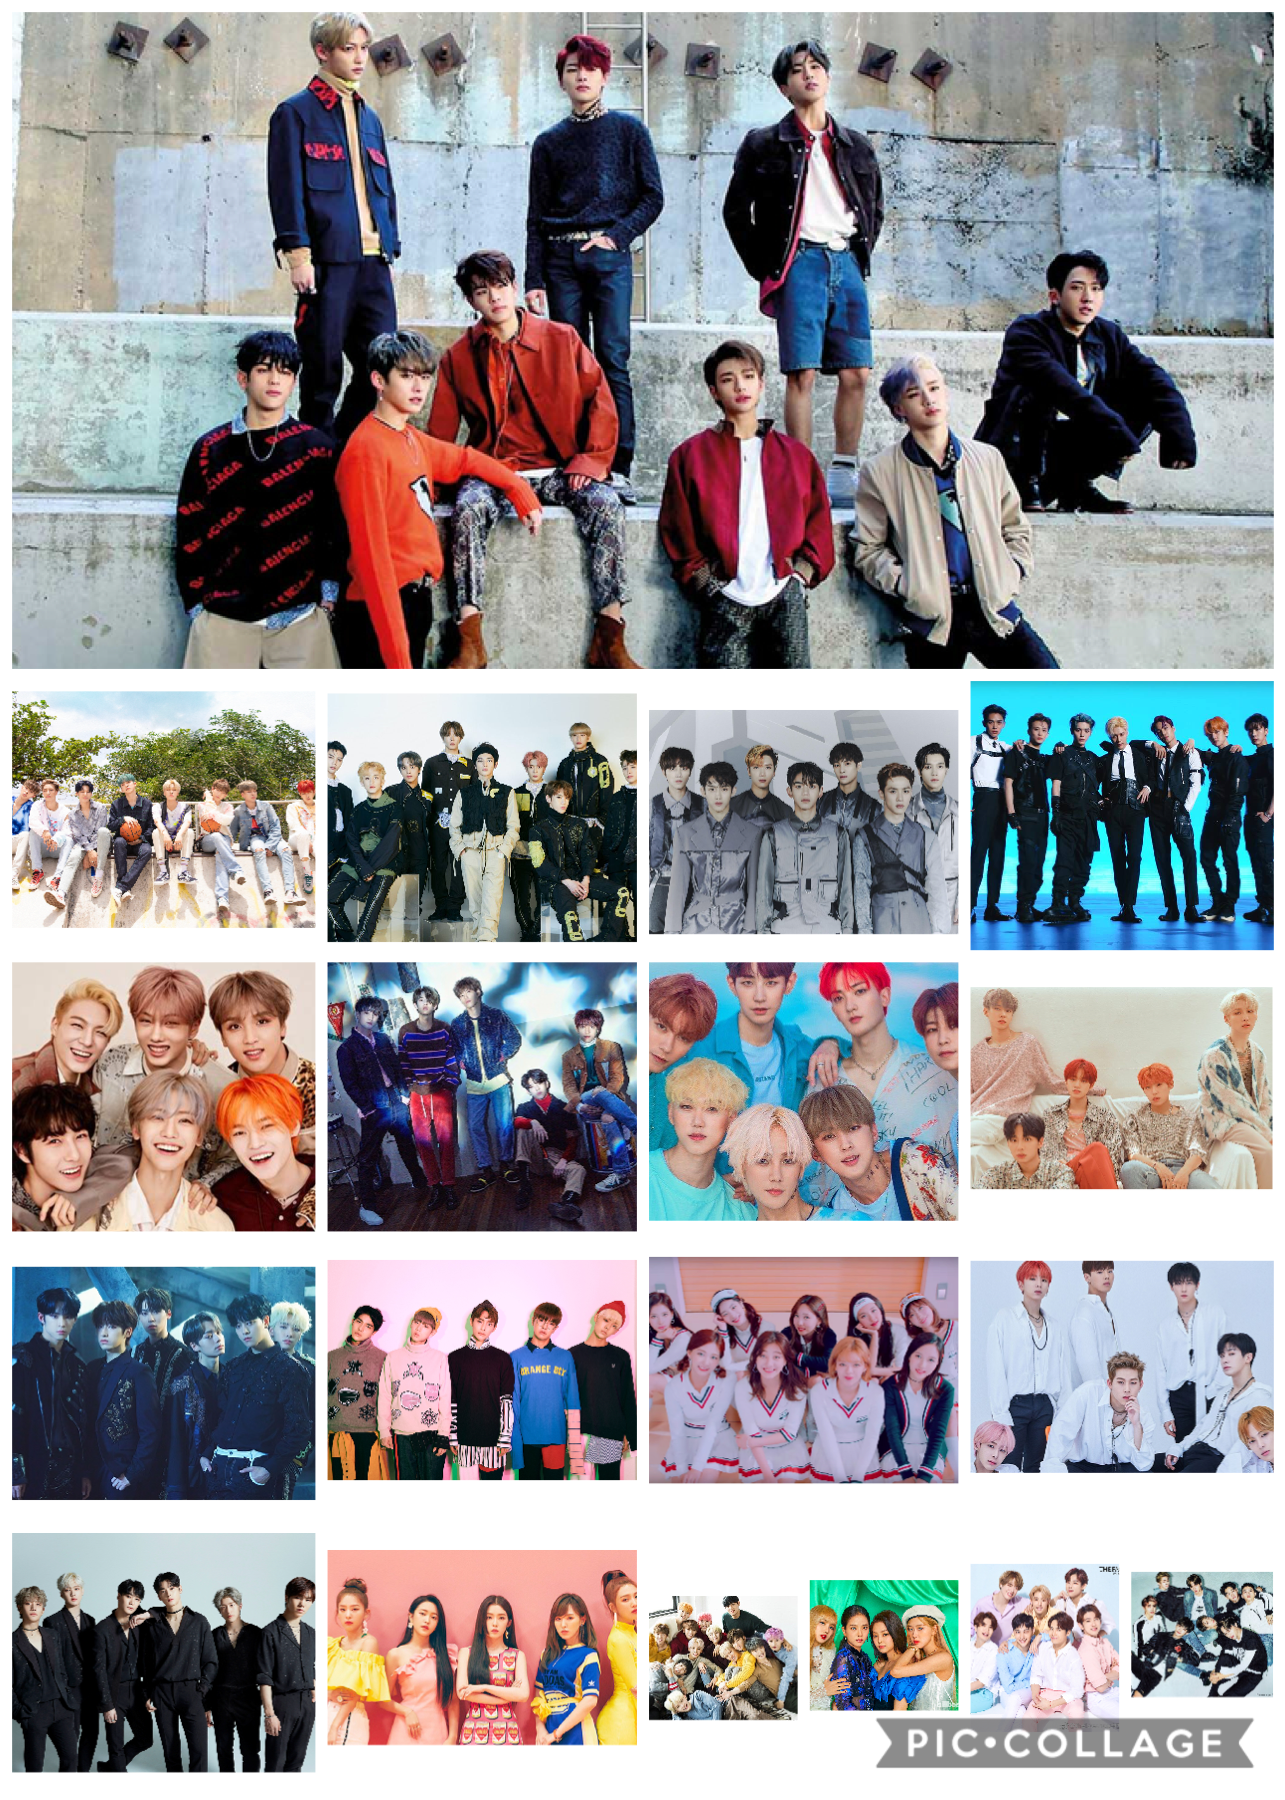 My top favorite groups. They go from favorite to least favorite. I still love them all 💓